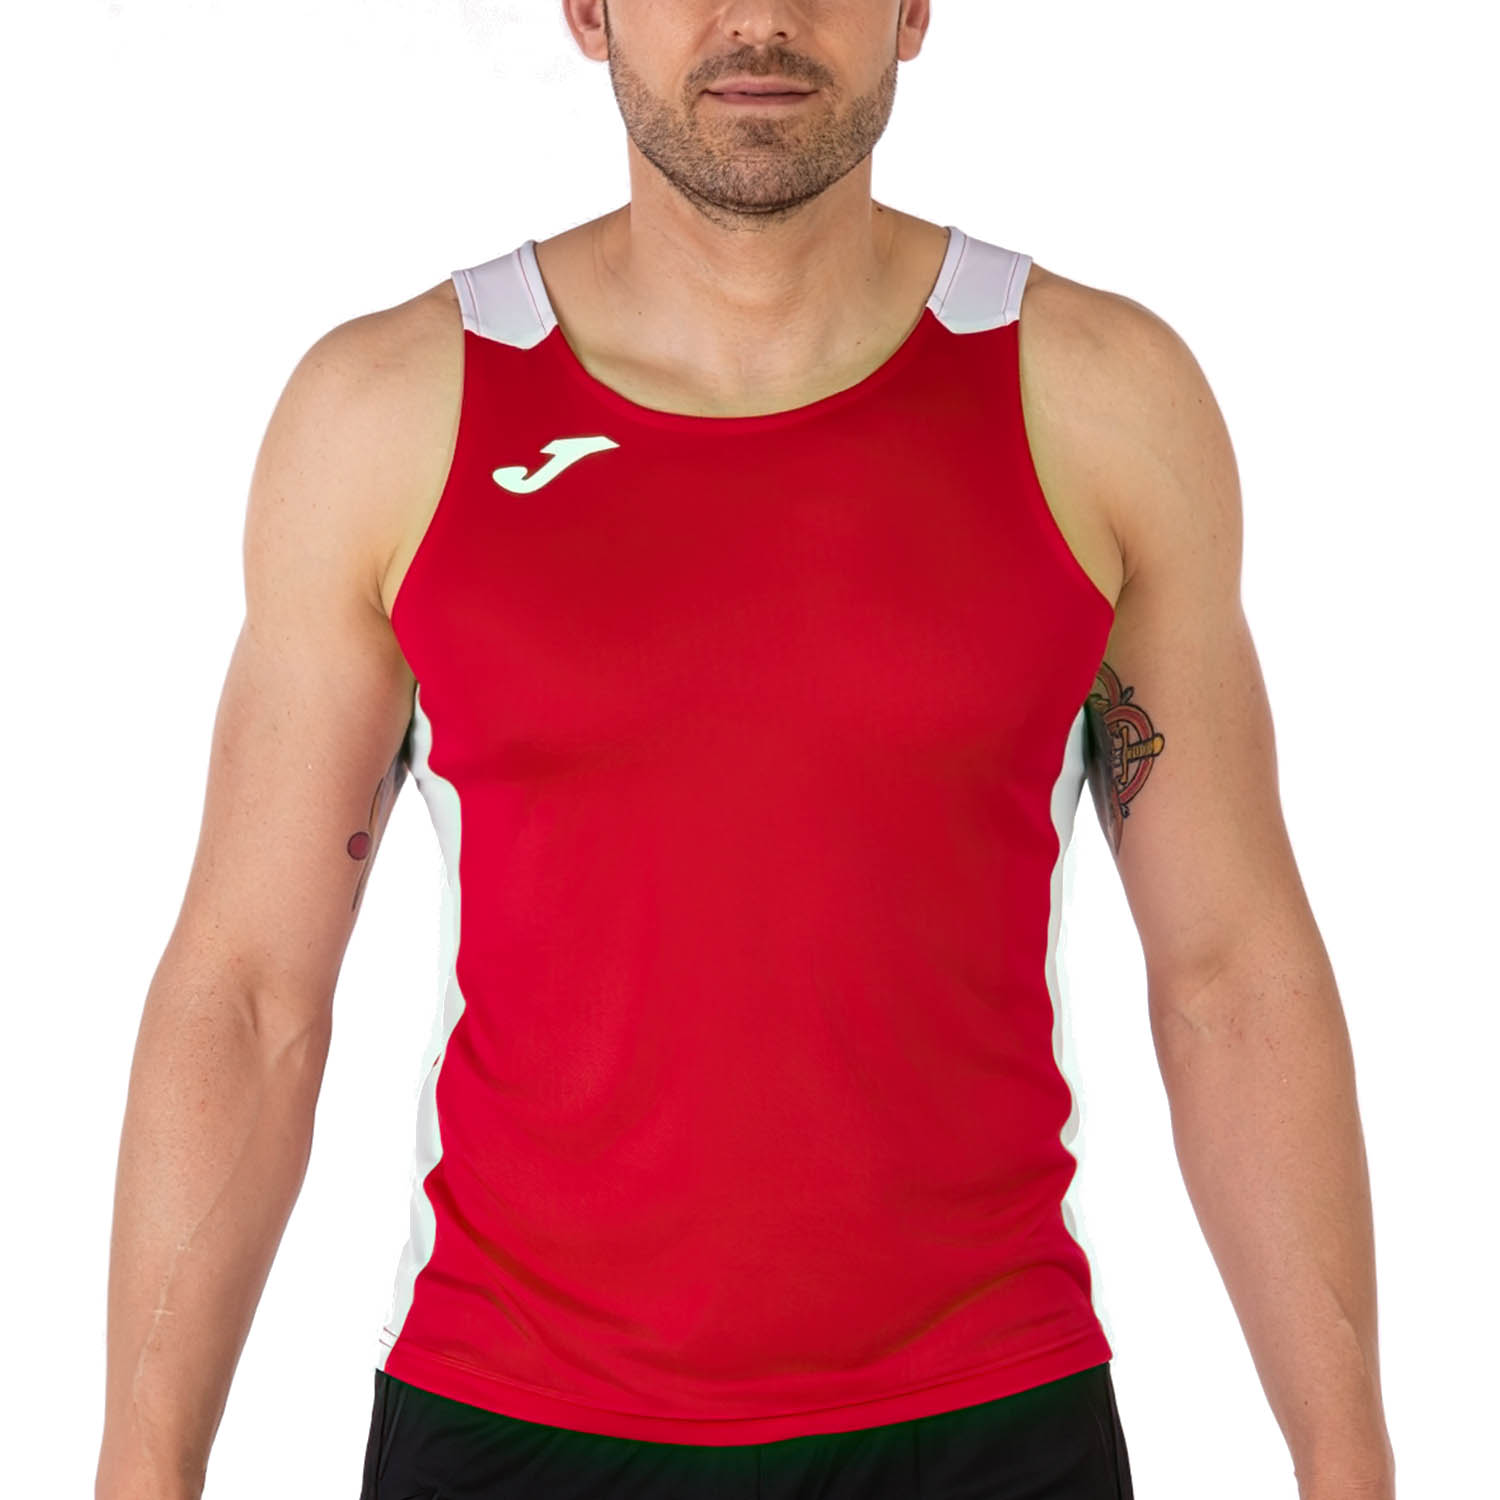 Joma Record II Top - Red/White